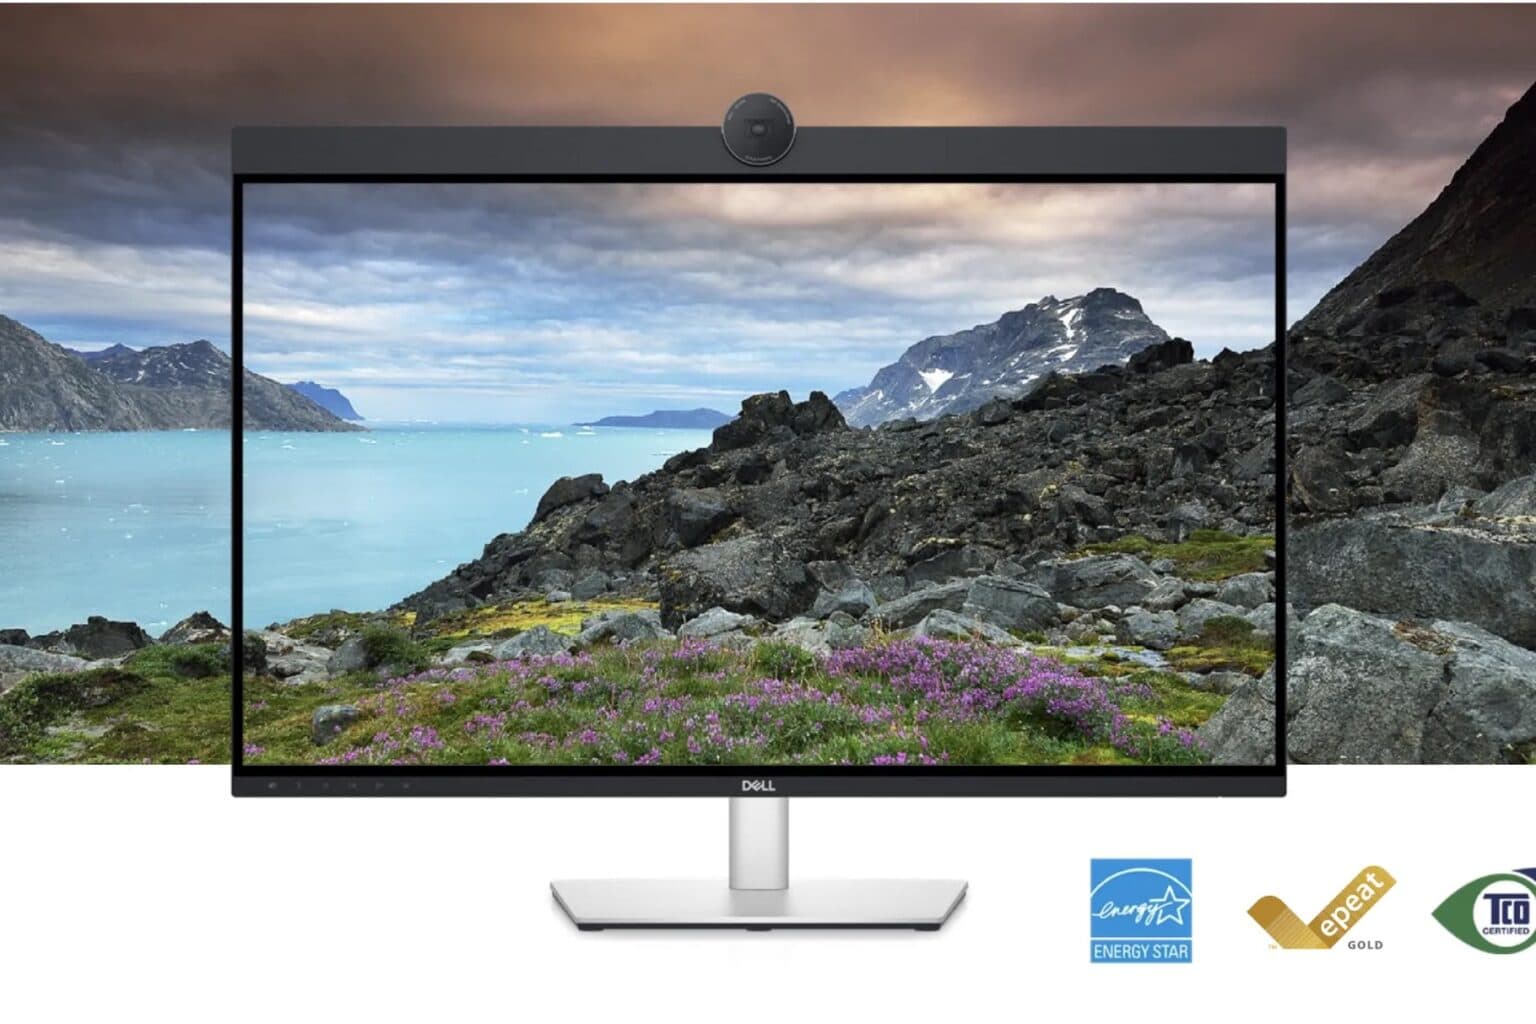 Dell's new 32-inch UltraSharp display features a built-in 4K webcam.